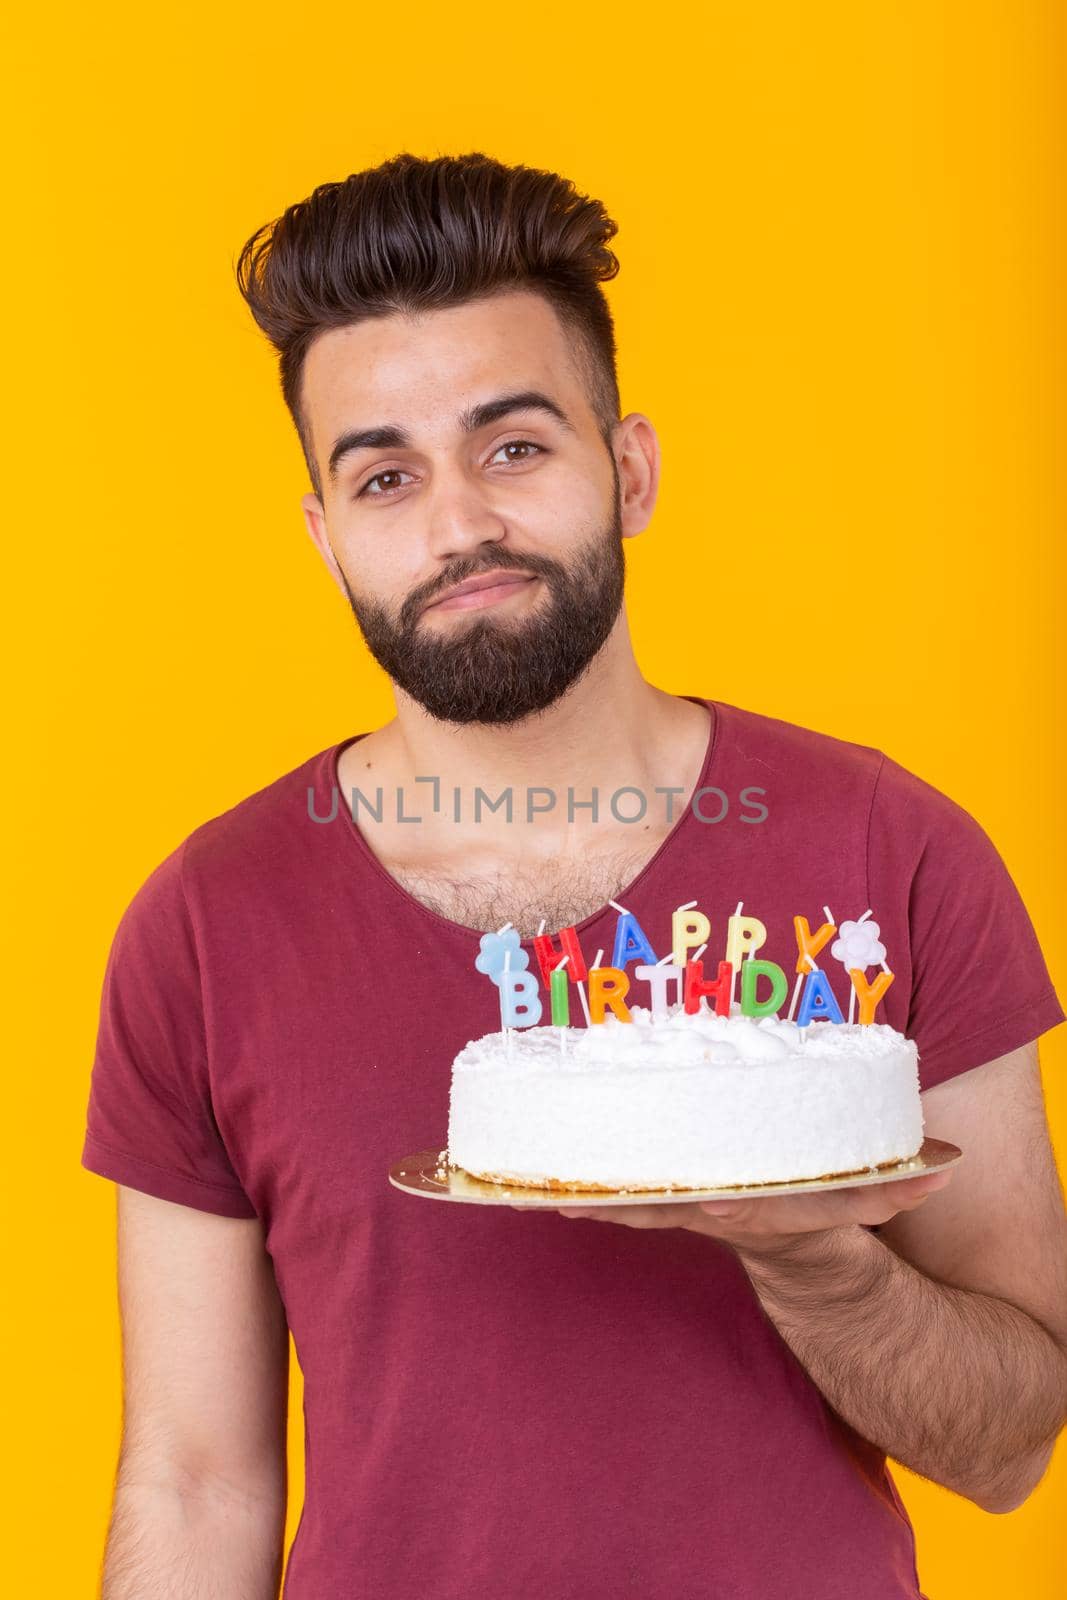 Embarrassed young male hipster with beard holding a birthday cake in his hands and looking thoughtfully at him posing on a yellow background. Concept of time quickly flies by. Advertising space